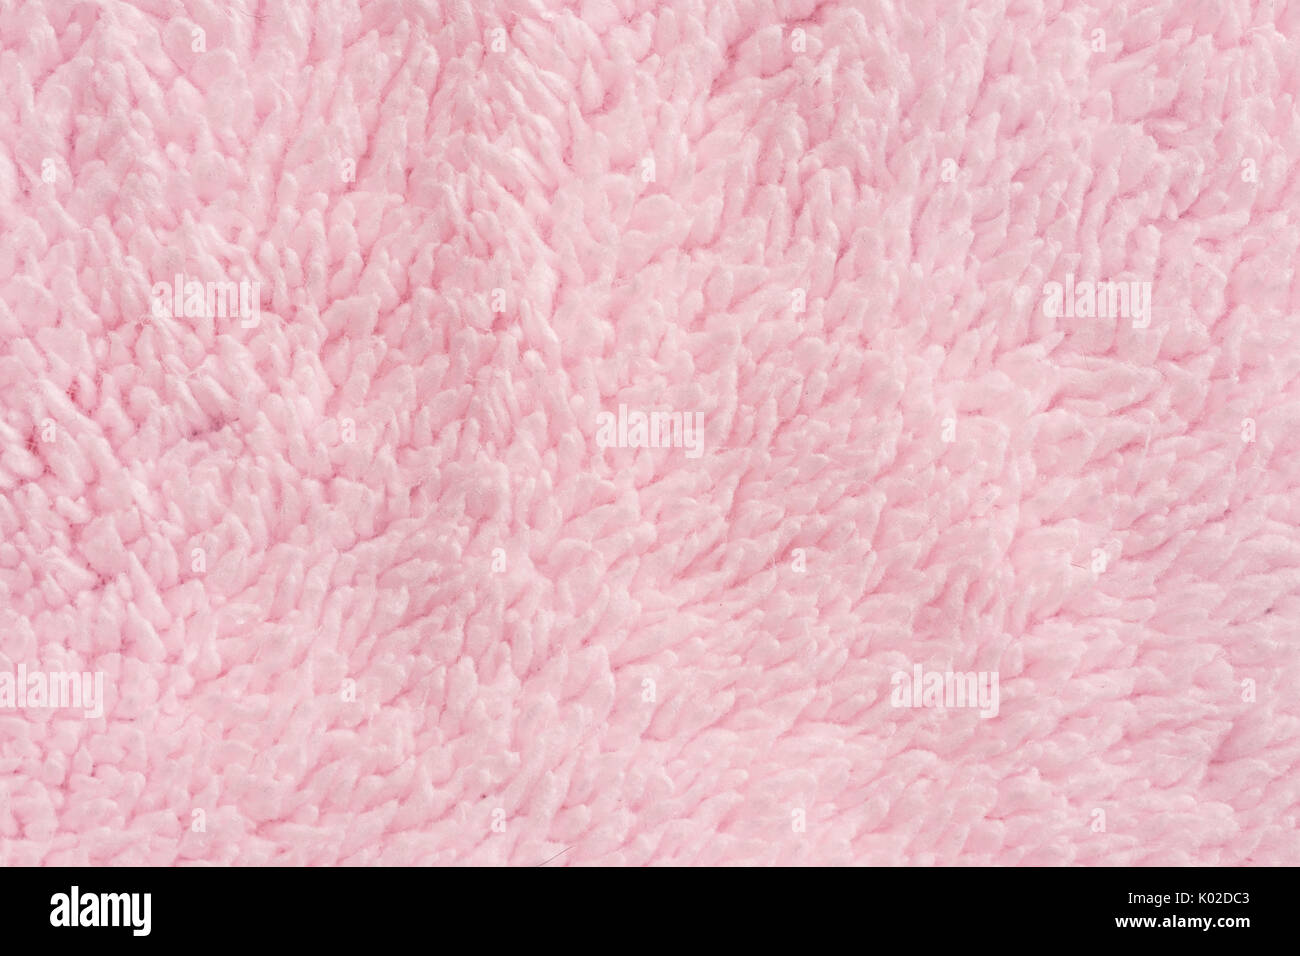 close up pink towel texture and background Stock Photo